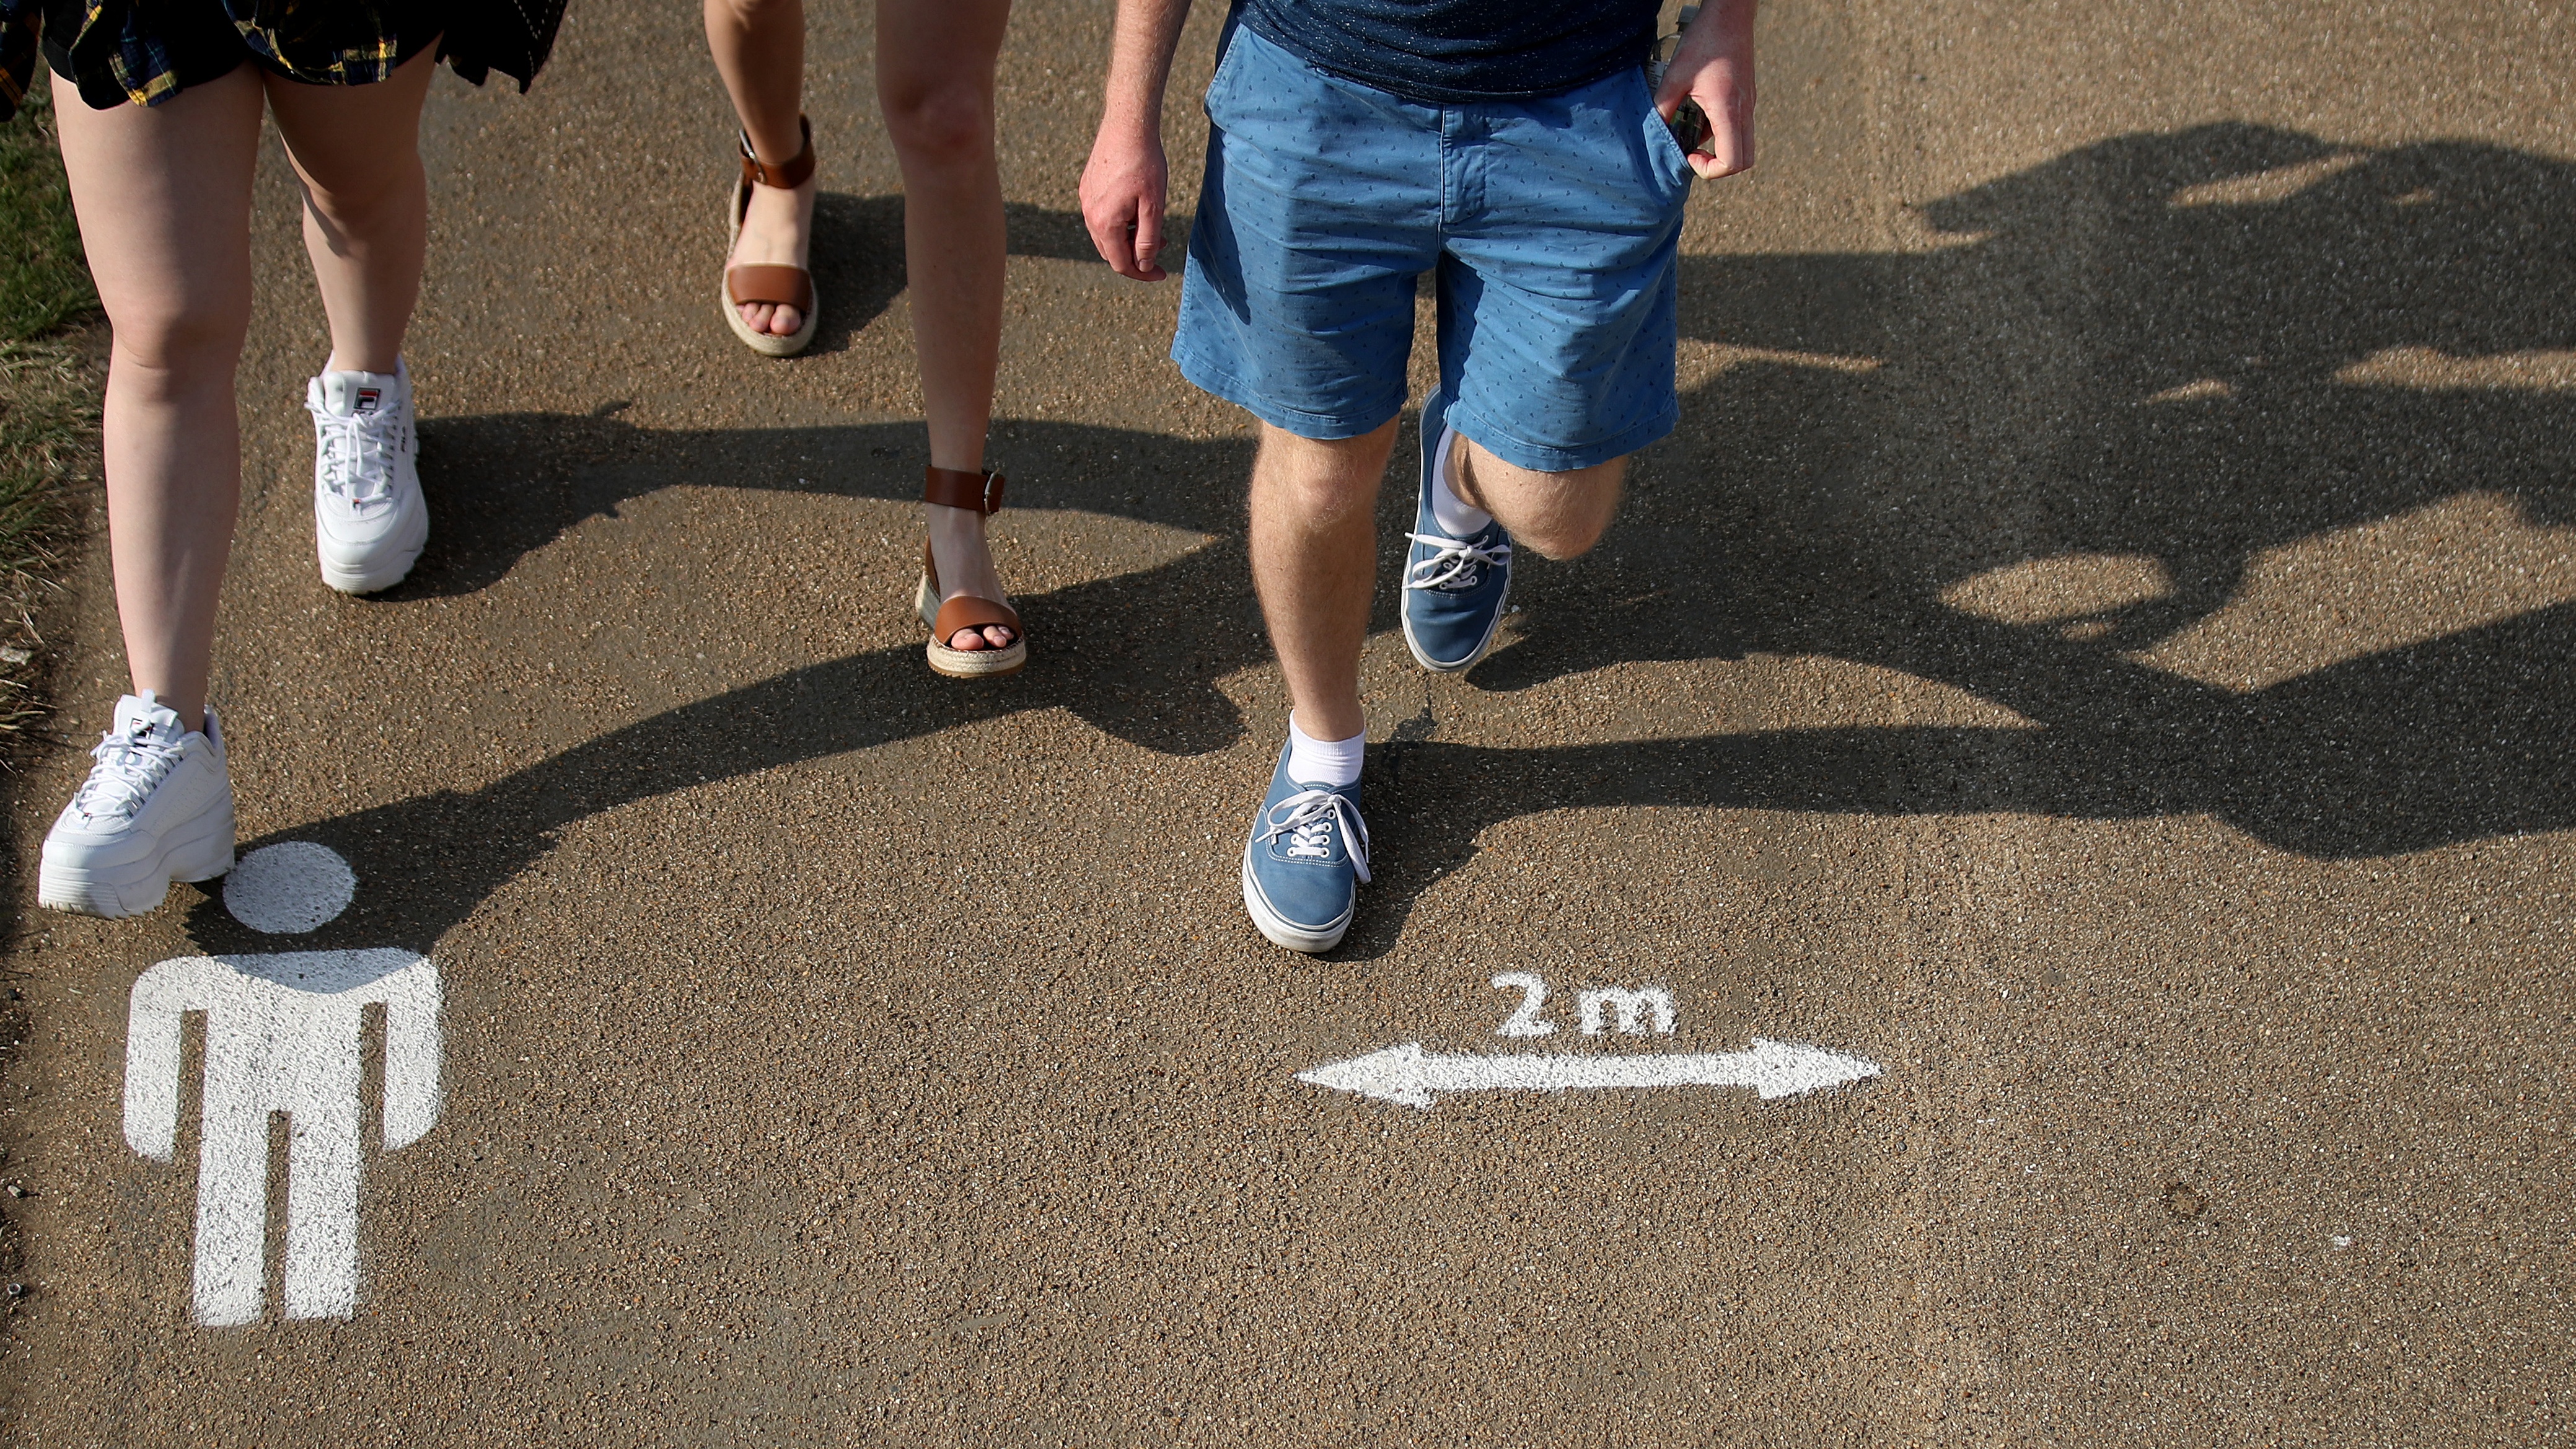 People walk past the social distancing markings on the ground at Queen Elizabeth Olympic Park.